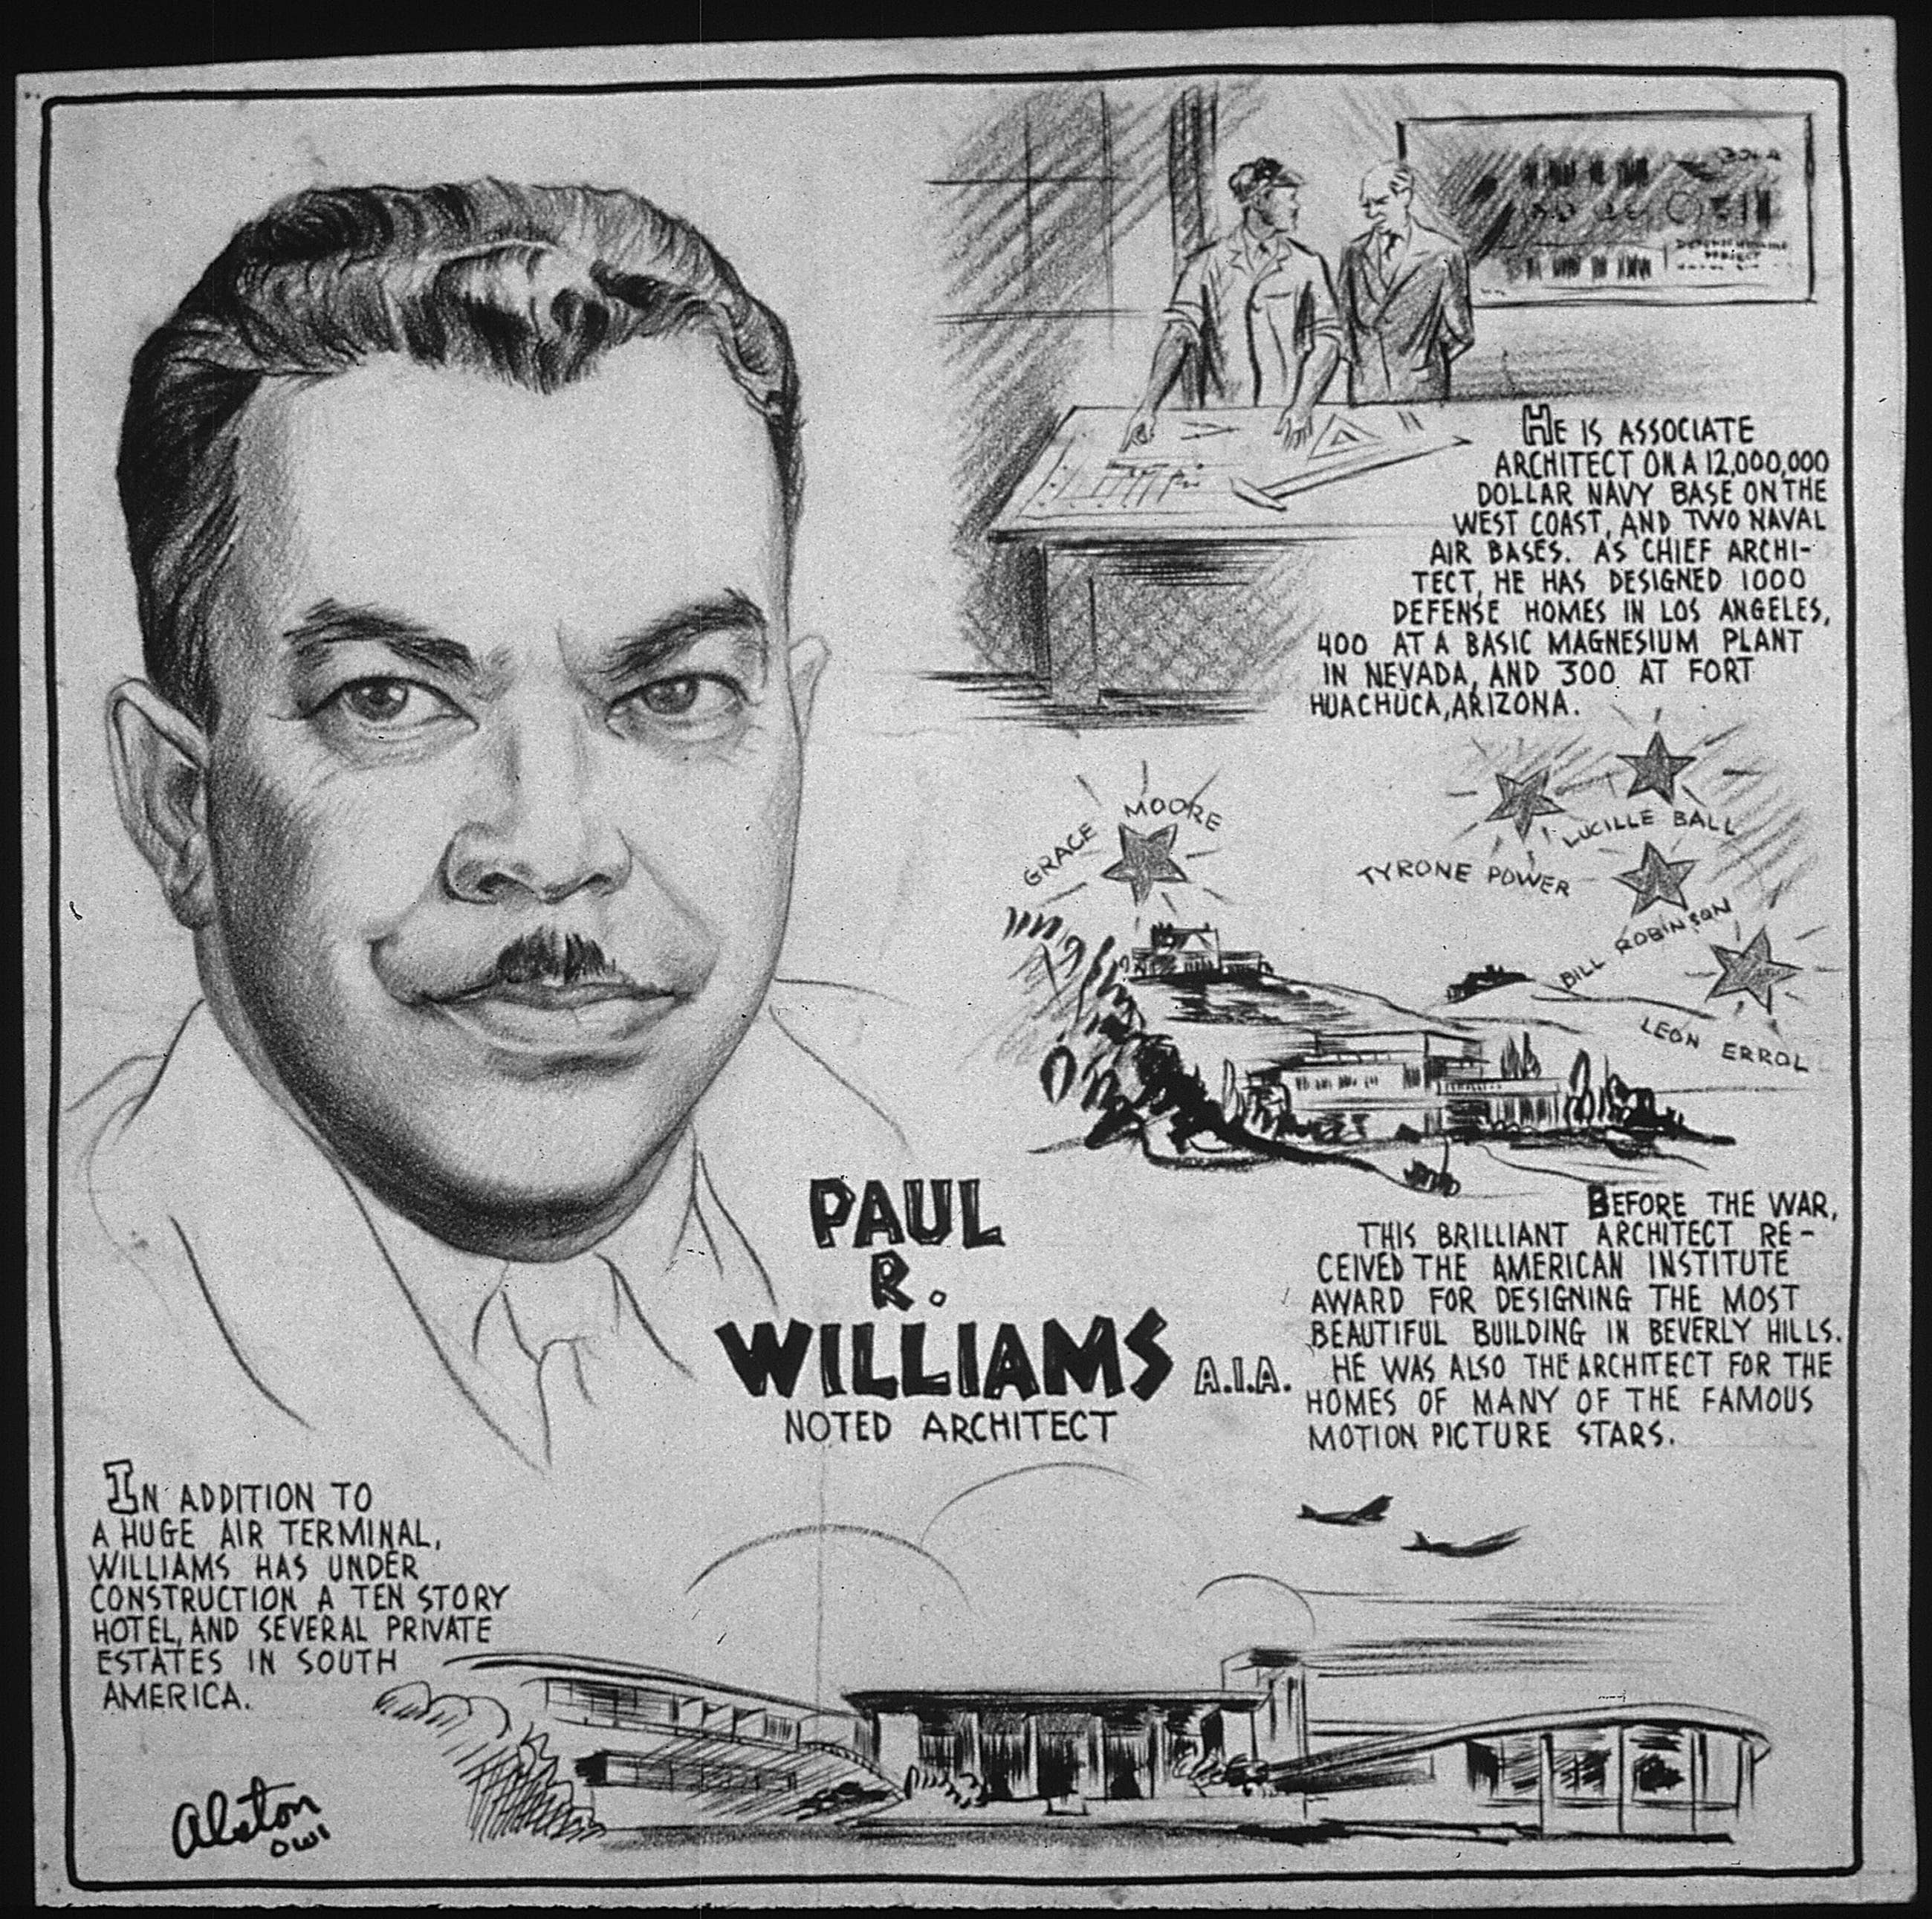 “PAUL R. WILLIAMS, A.I.A. - NOTED ARCHITECT” illustration